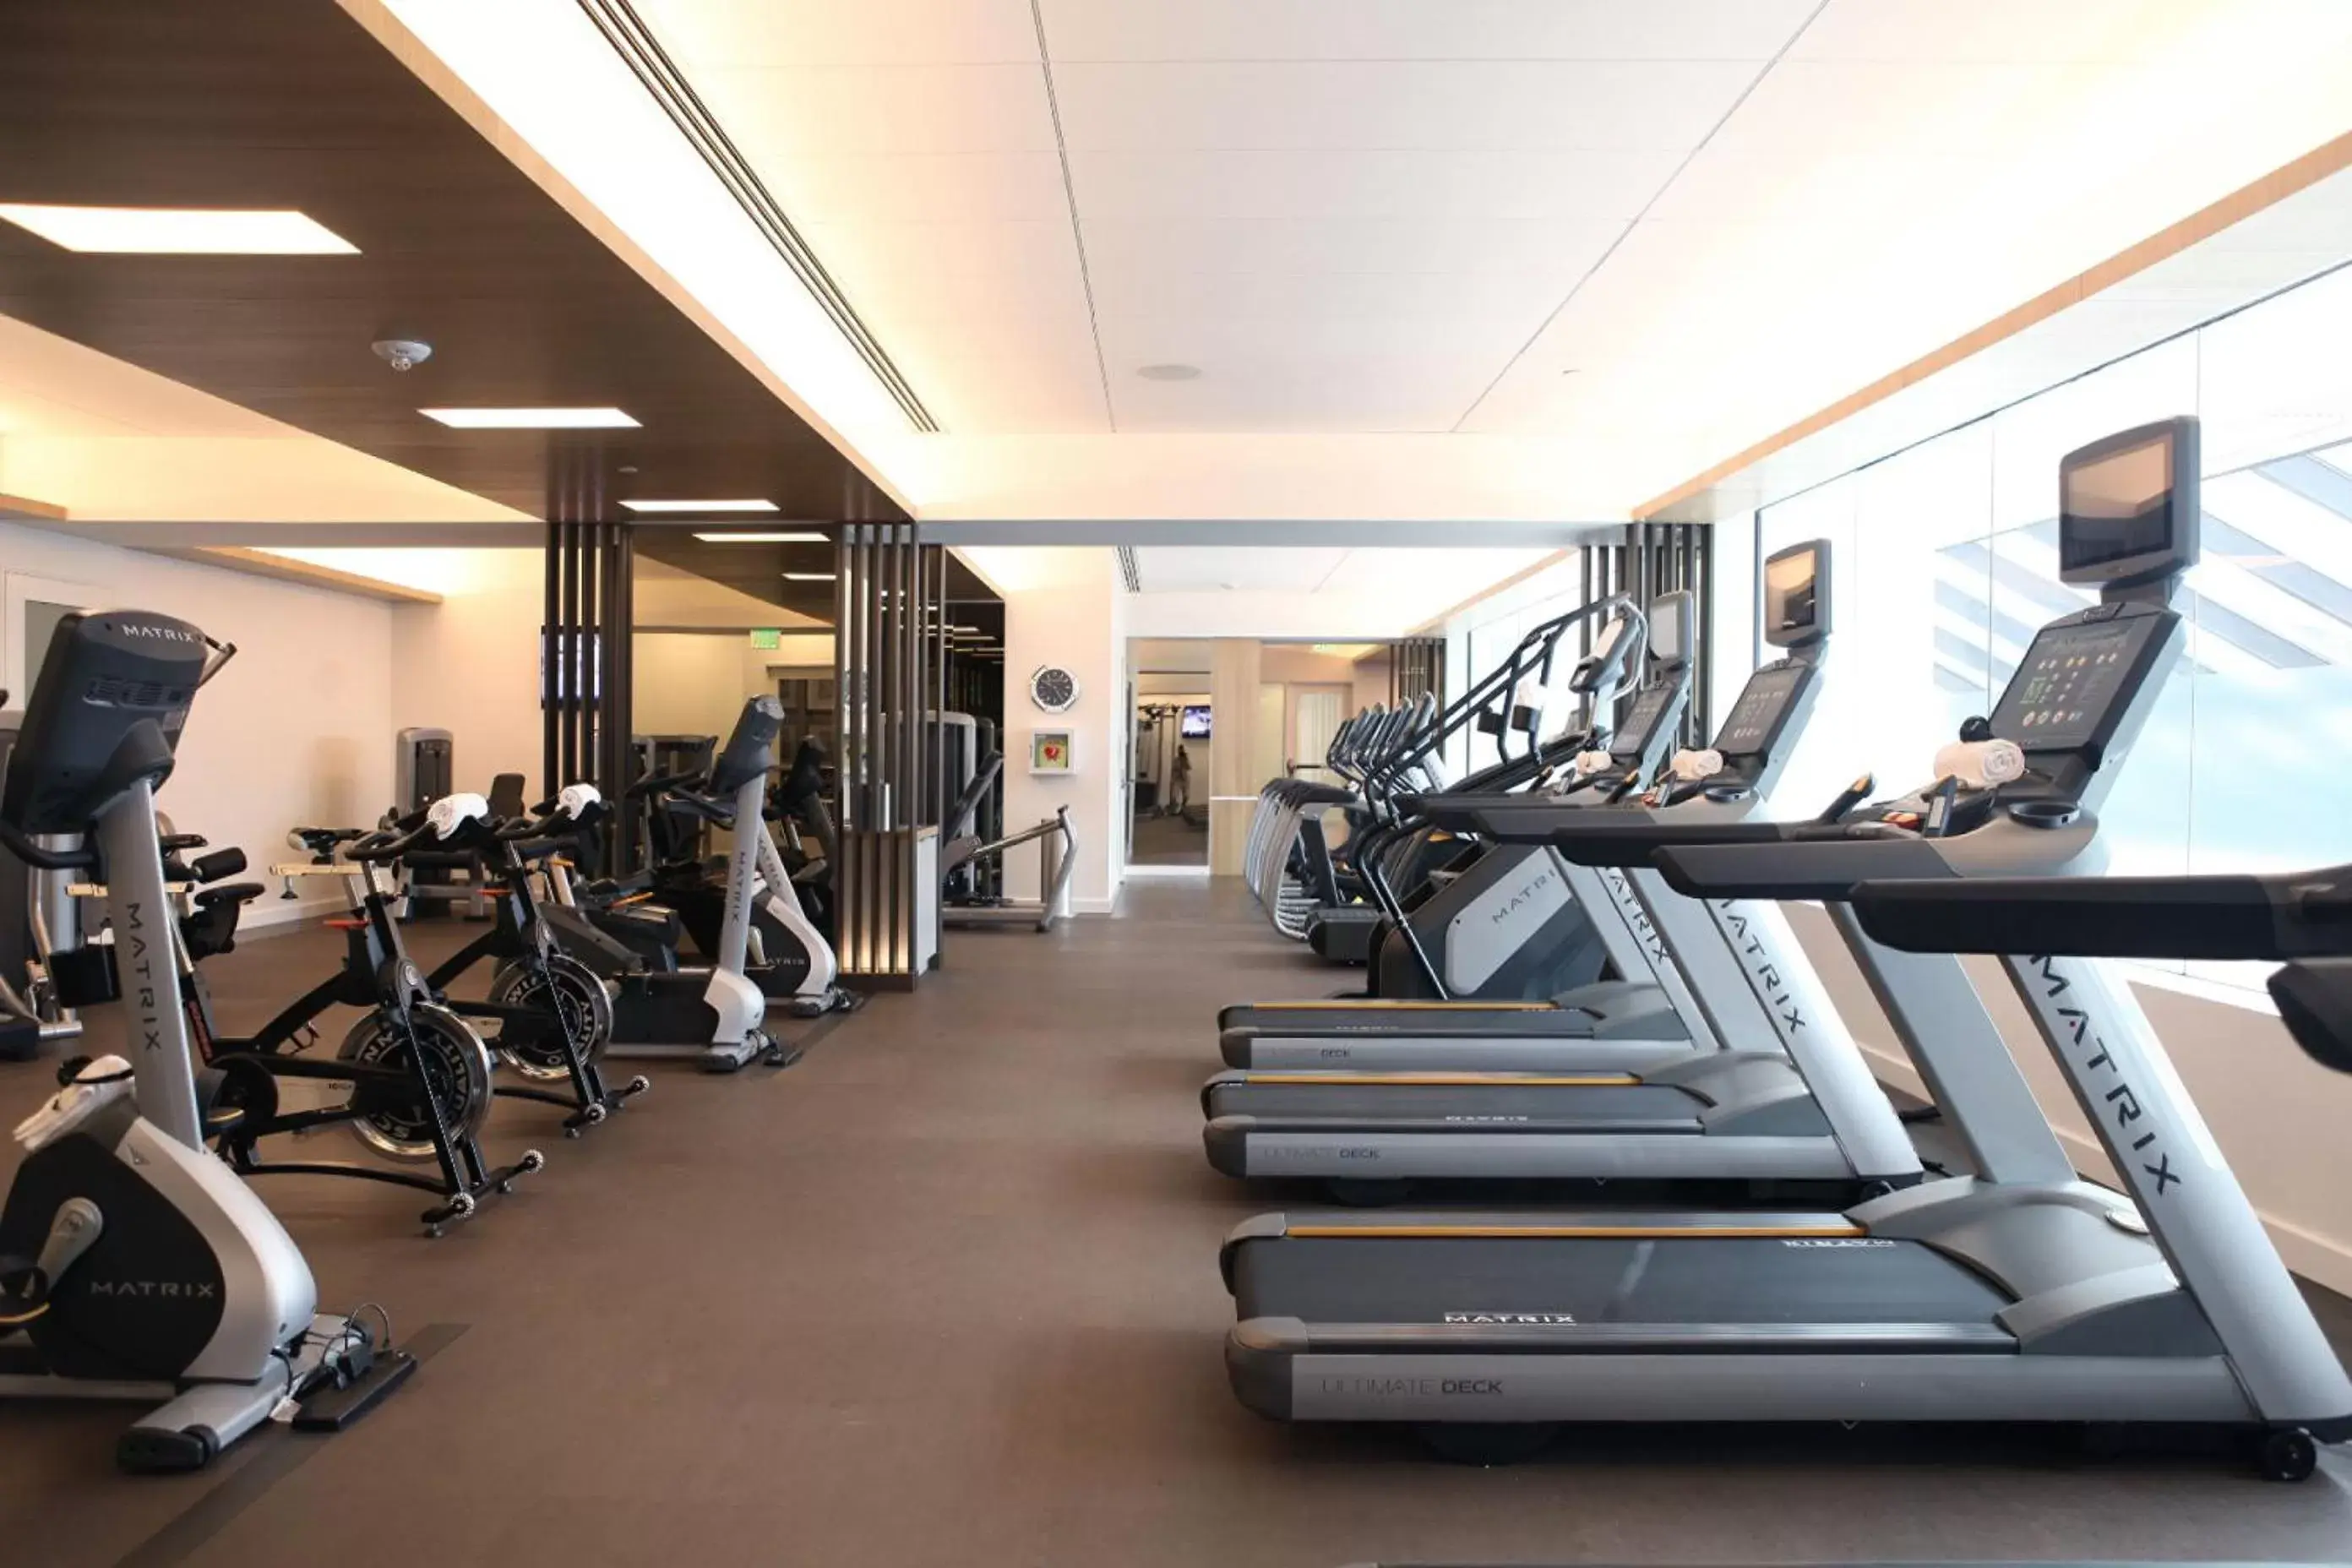 Fitness centre/facilities, Fitness Center/Facilities in Four Seasons Hotel Houston